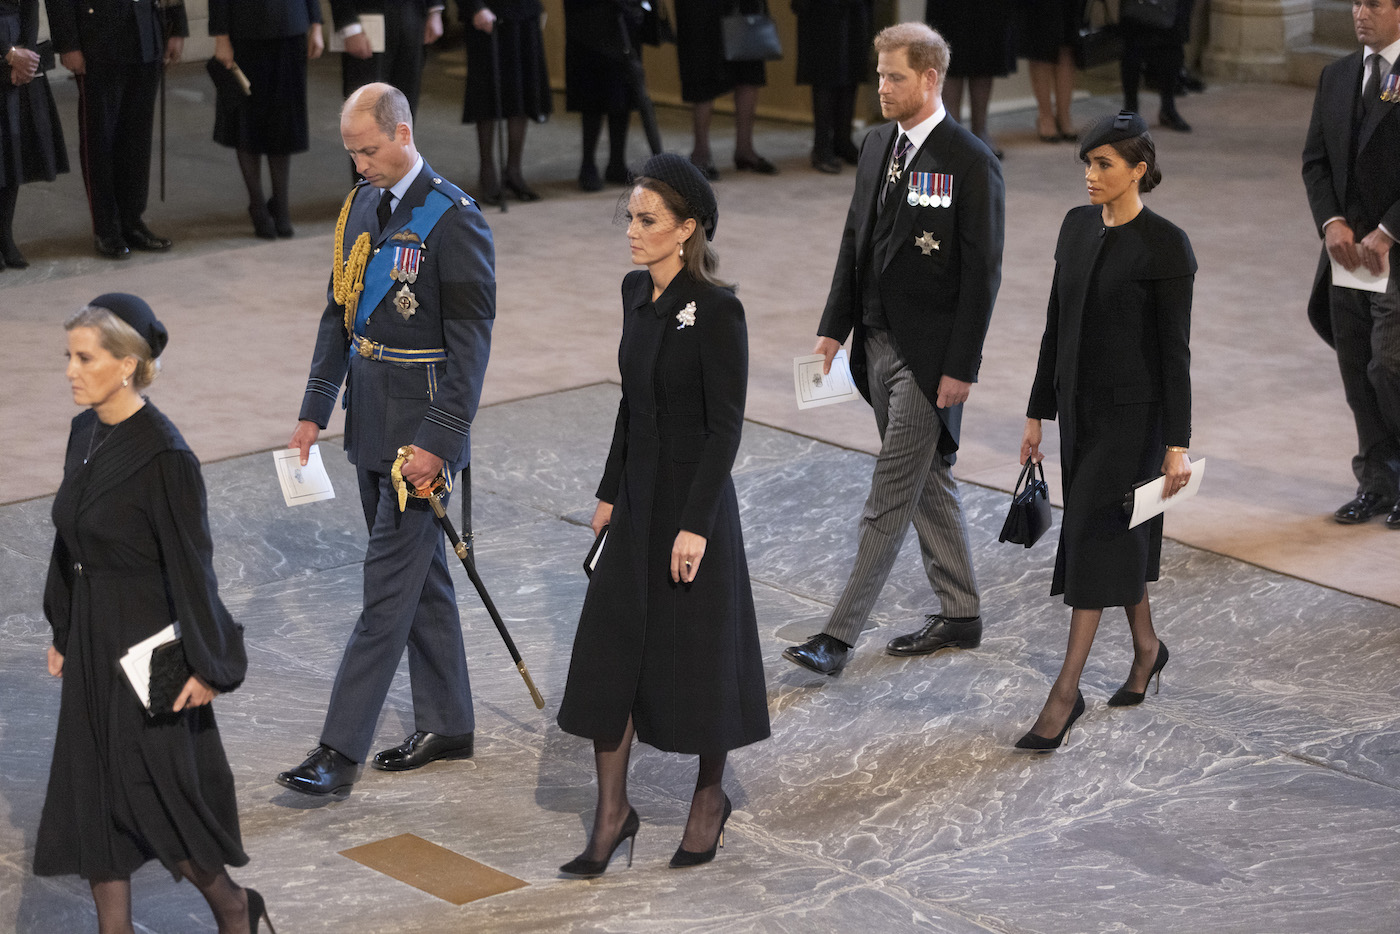 Prince William, Prince of Wales, Catherine, Princess of Wales, Harry, Duke of Sussex and Meghan, Duchess of Sussex walk behind the casket at the late Queens funeral 